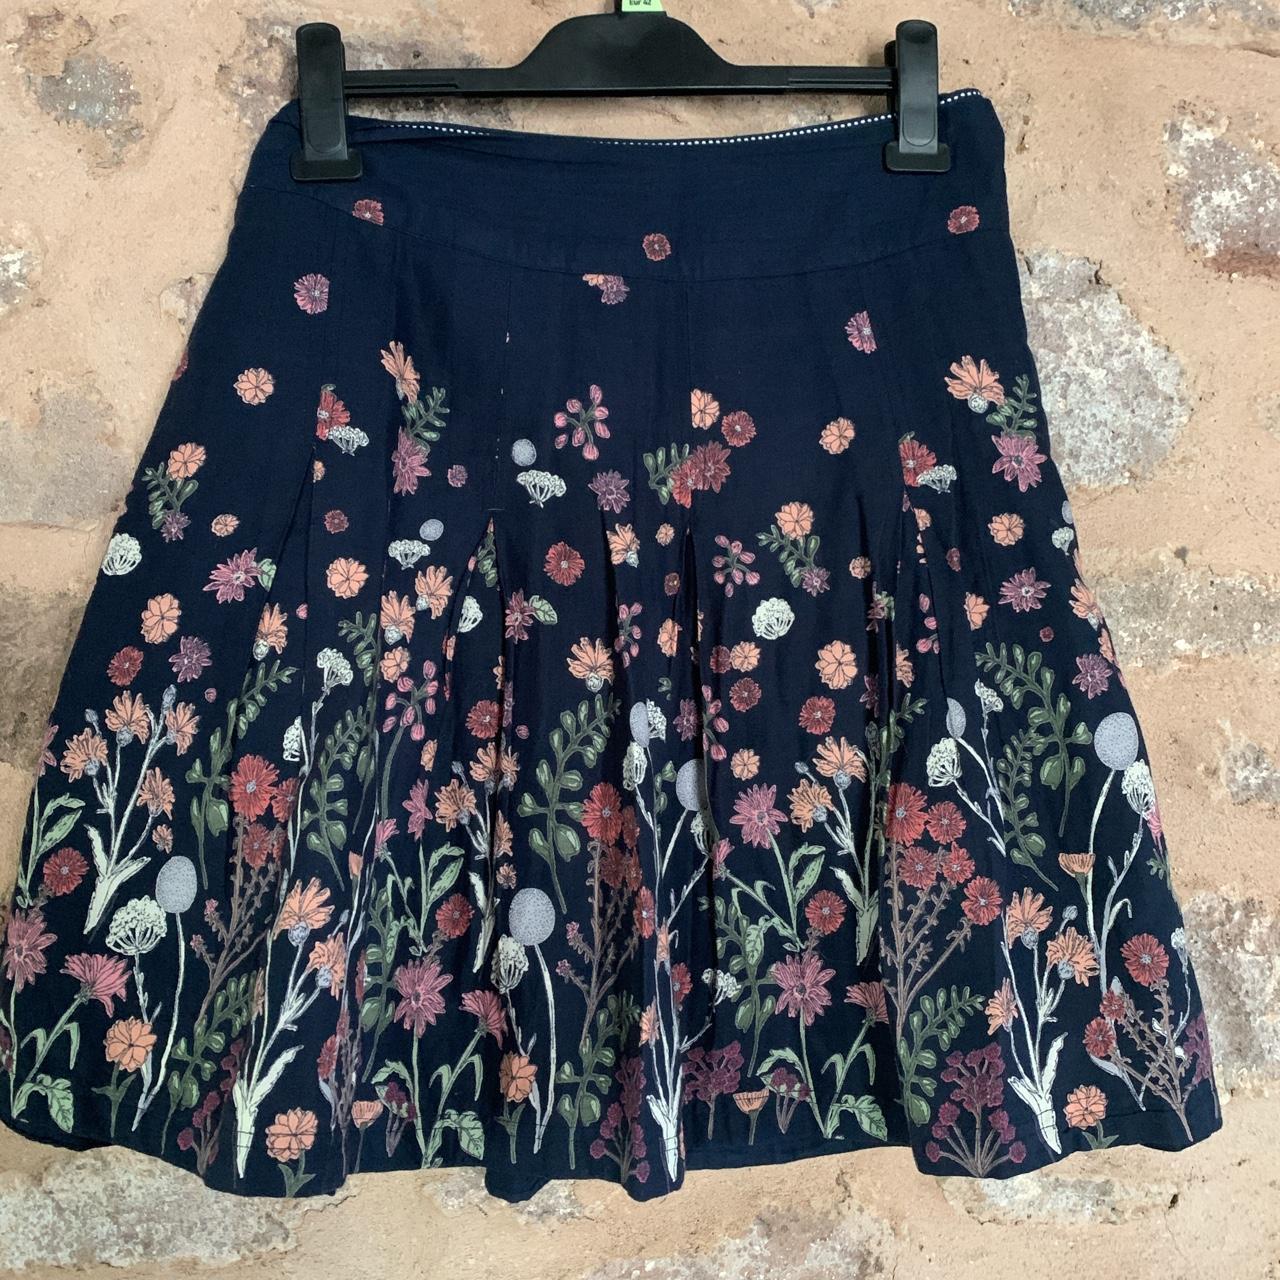 Embroidered mini skirt by Fat Face • UK size 16 •... - Depop